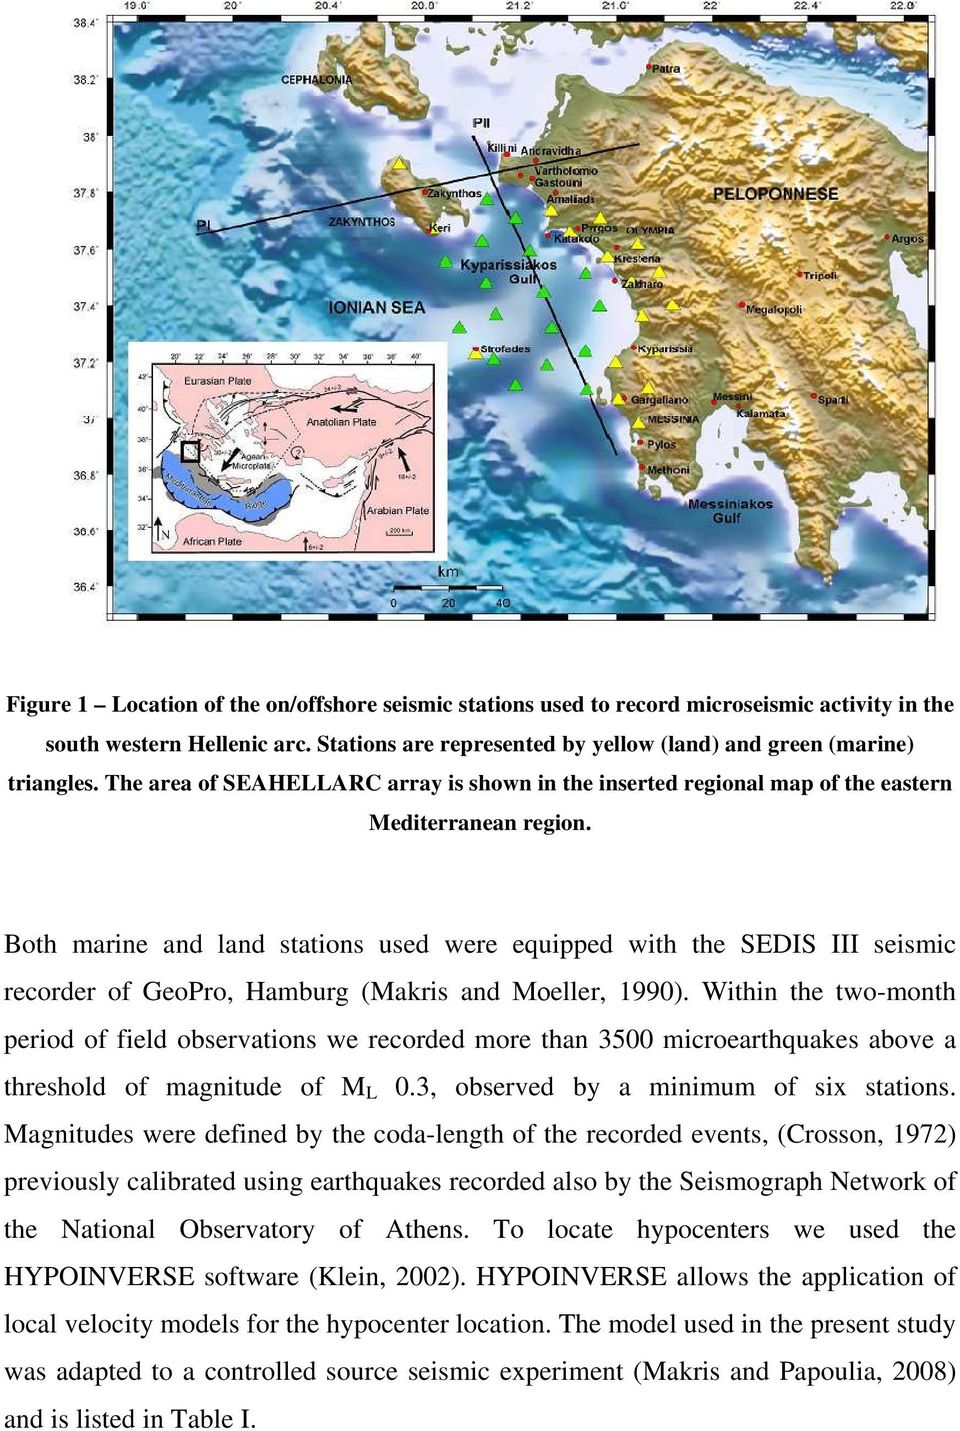 Both marine and land stations used were equipped with the SEDIS III seismic recorder of GeoPro, Hamburg (Makris and Μοeller, 1990).